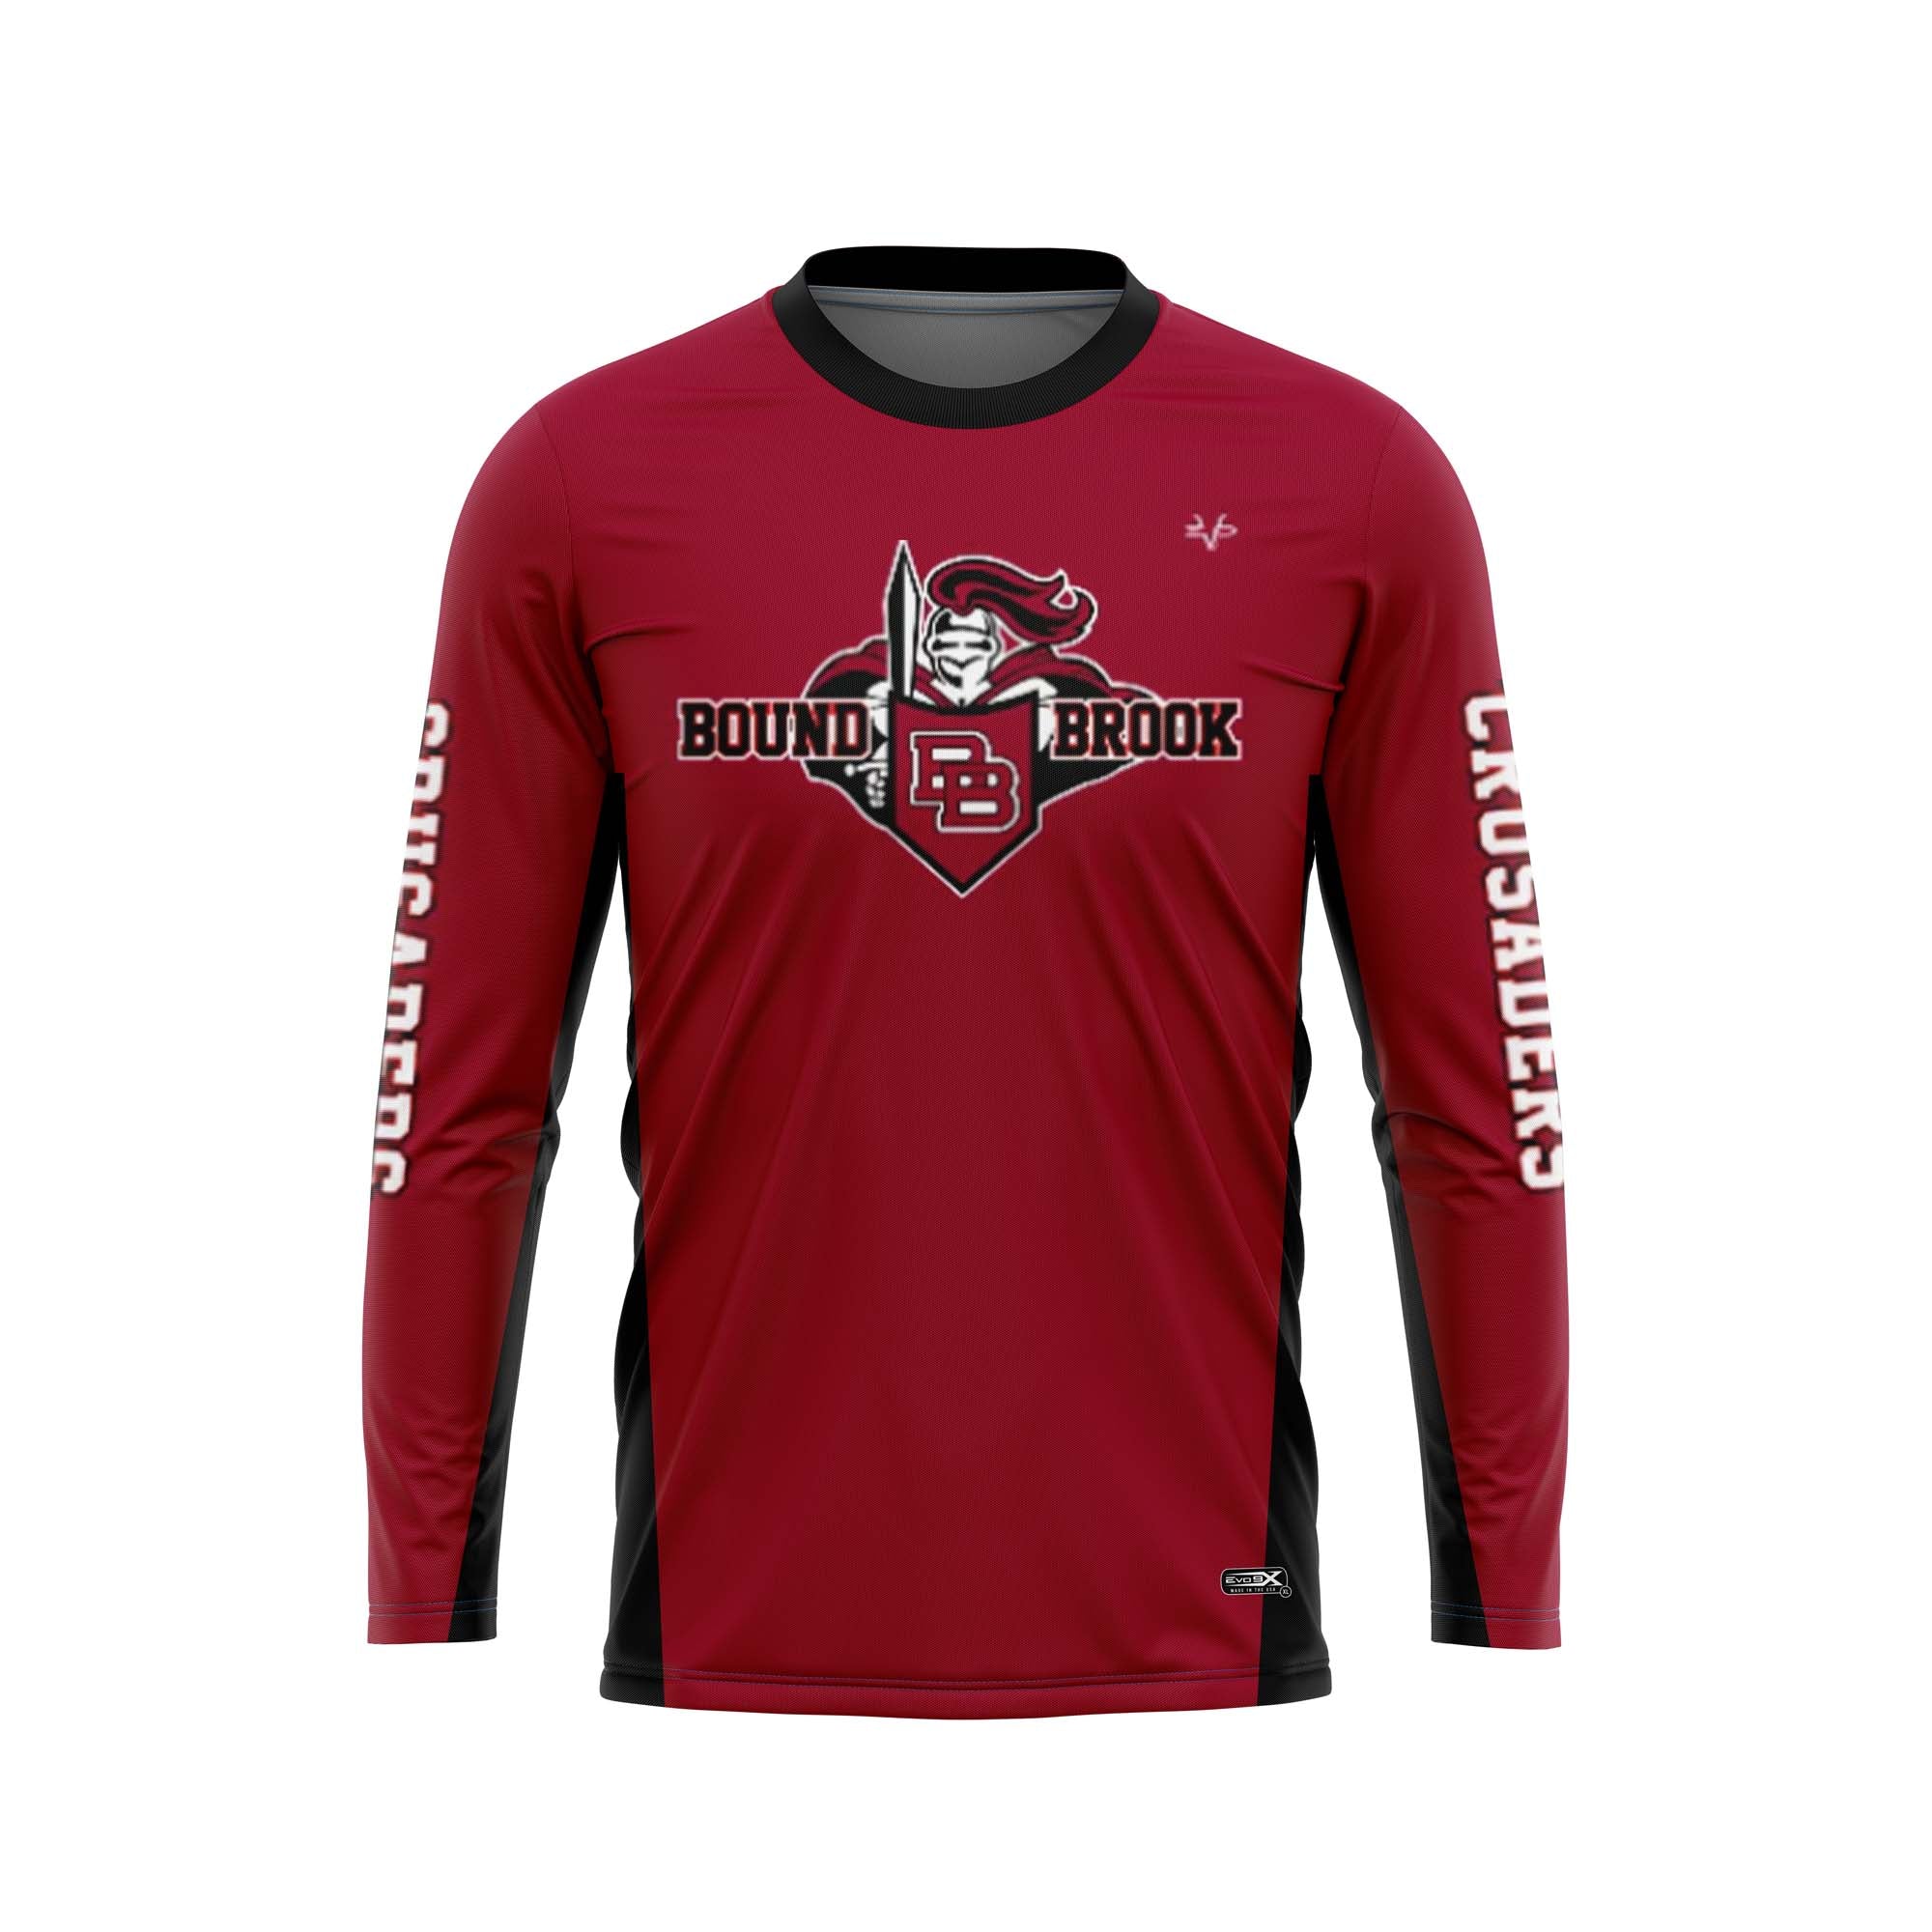 BOUND BROOK Football Sublimated Long Sleeve Jersey Red